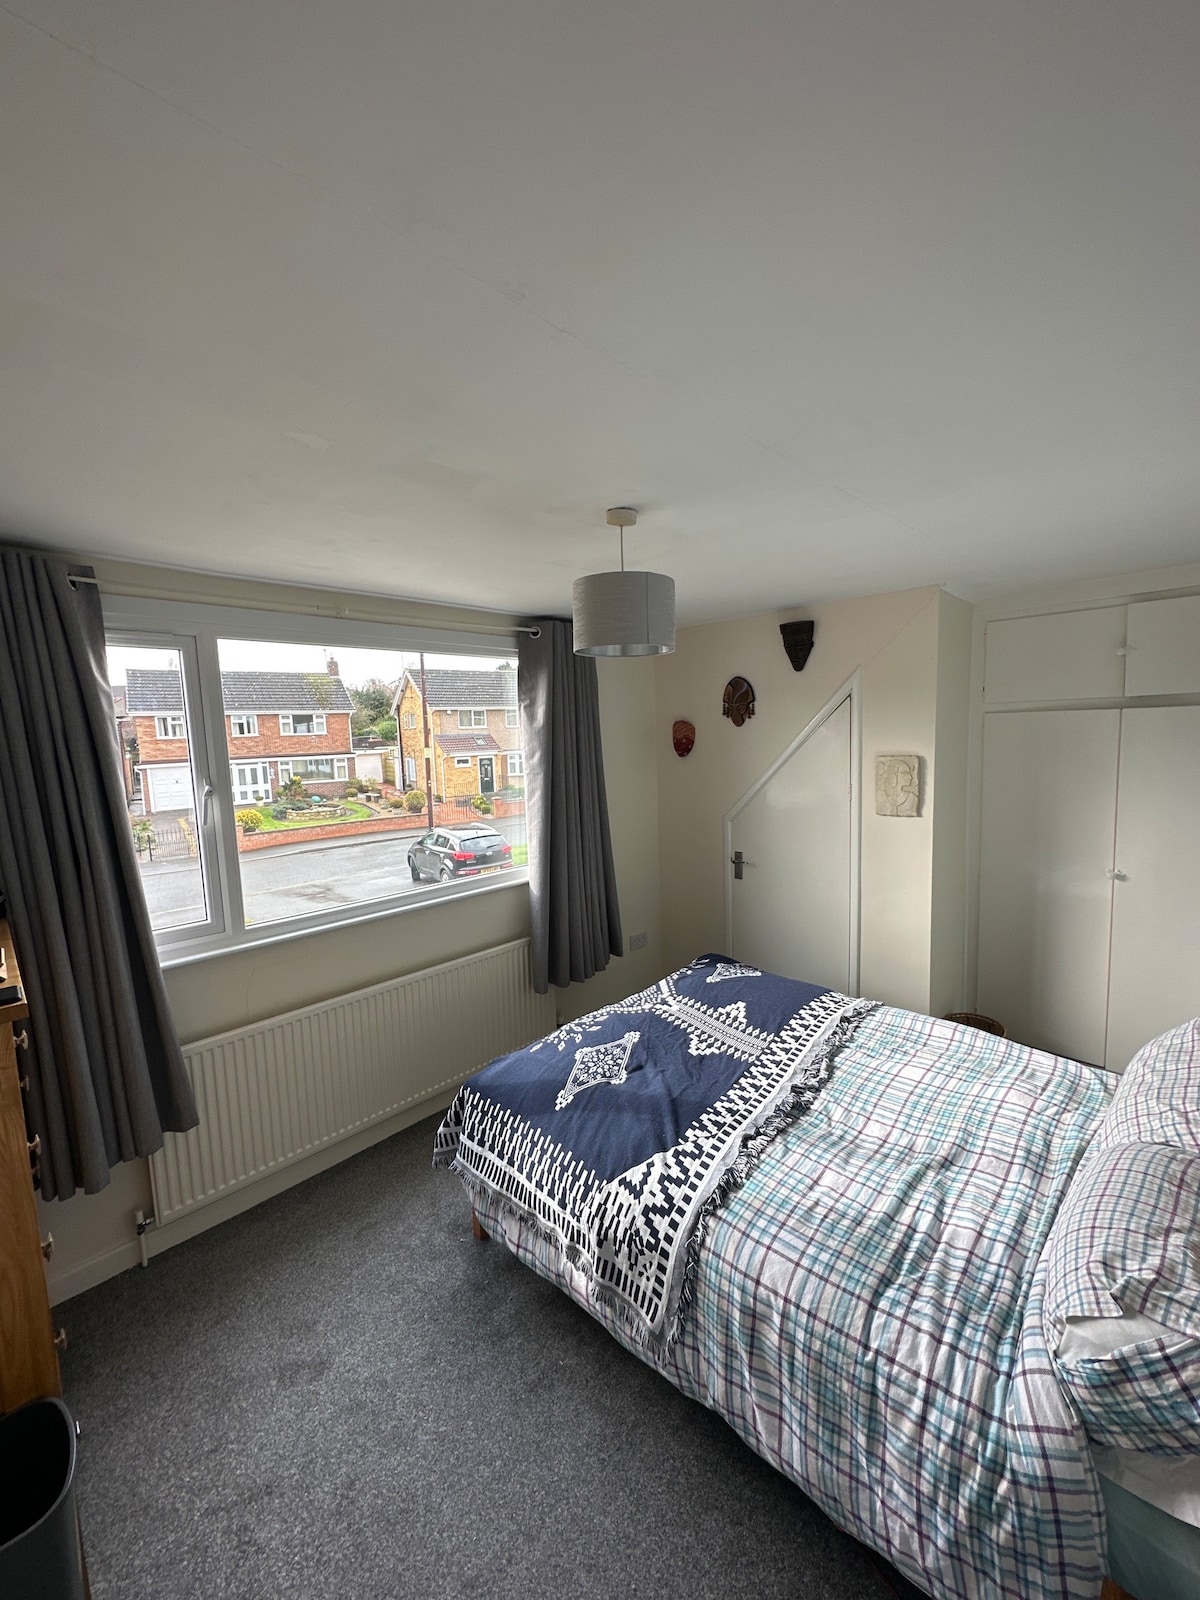 2 Bed spacious Kettering House